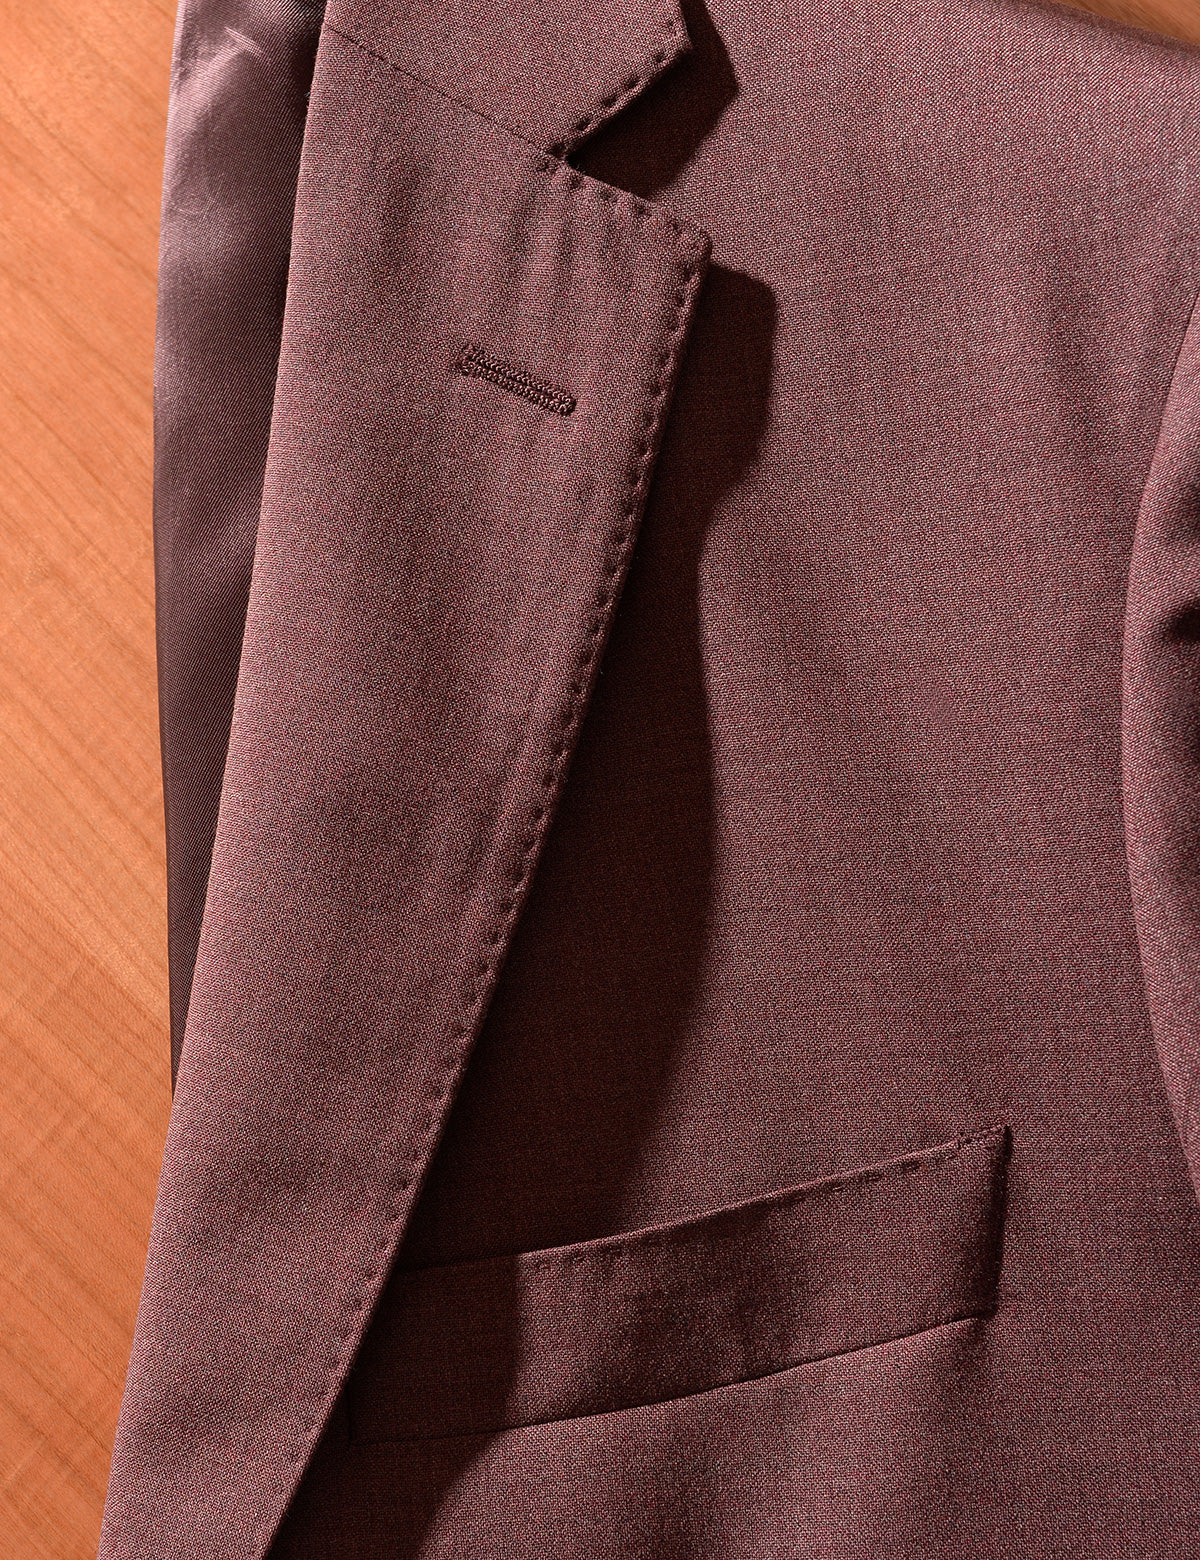 BKT50 Tailored Jacket in 14.5 Micron Mouliné - Cordovan